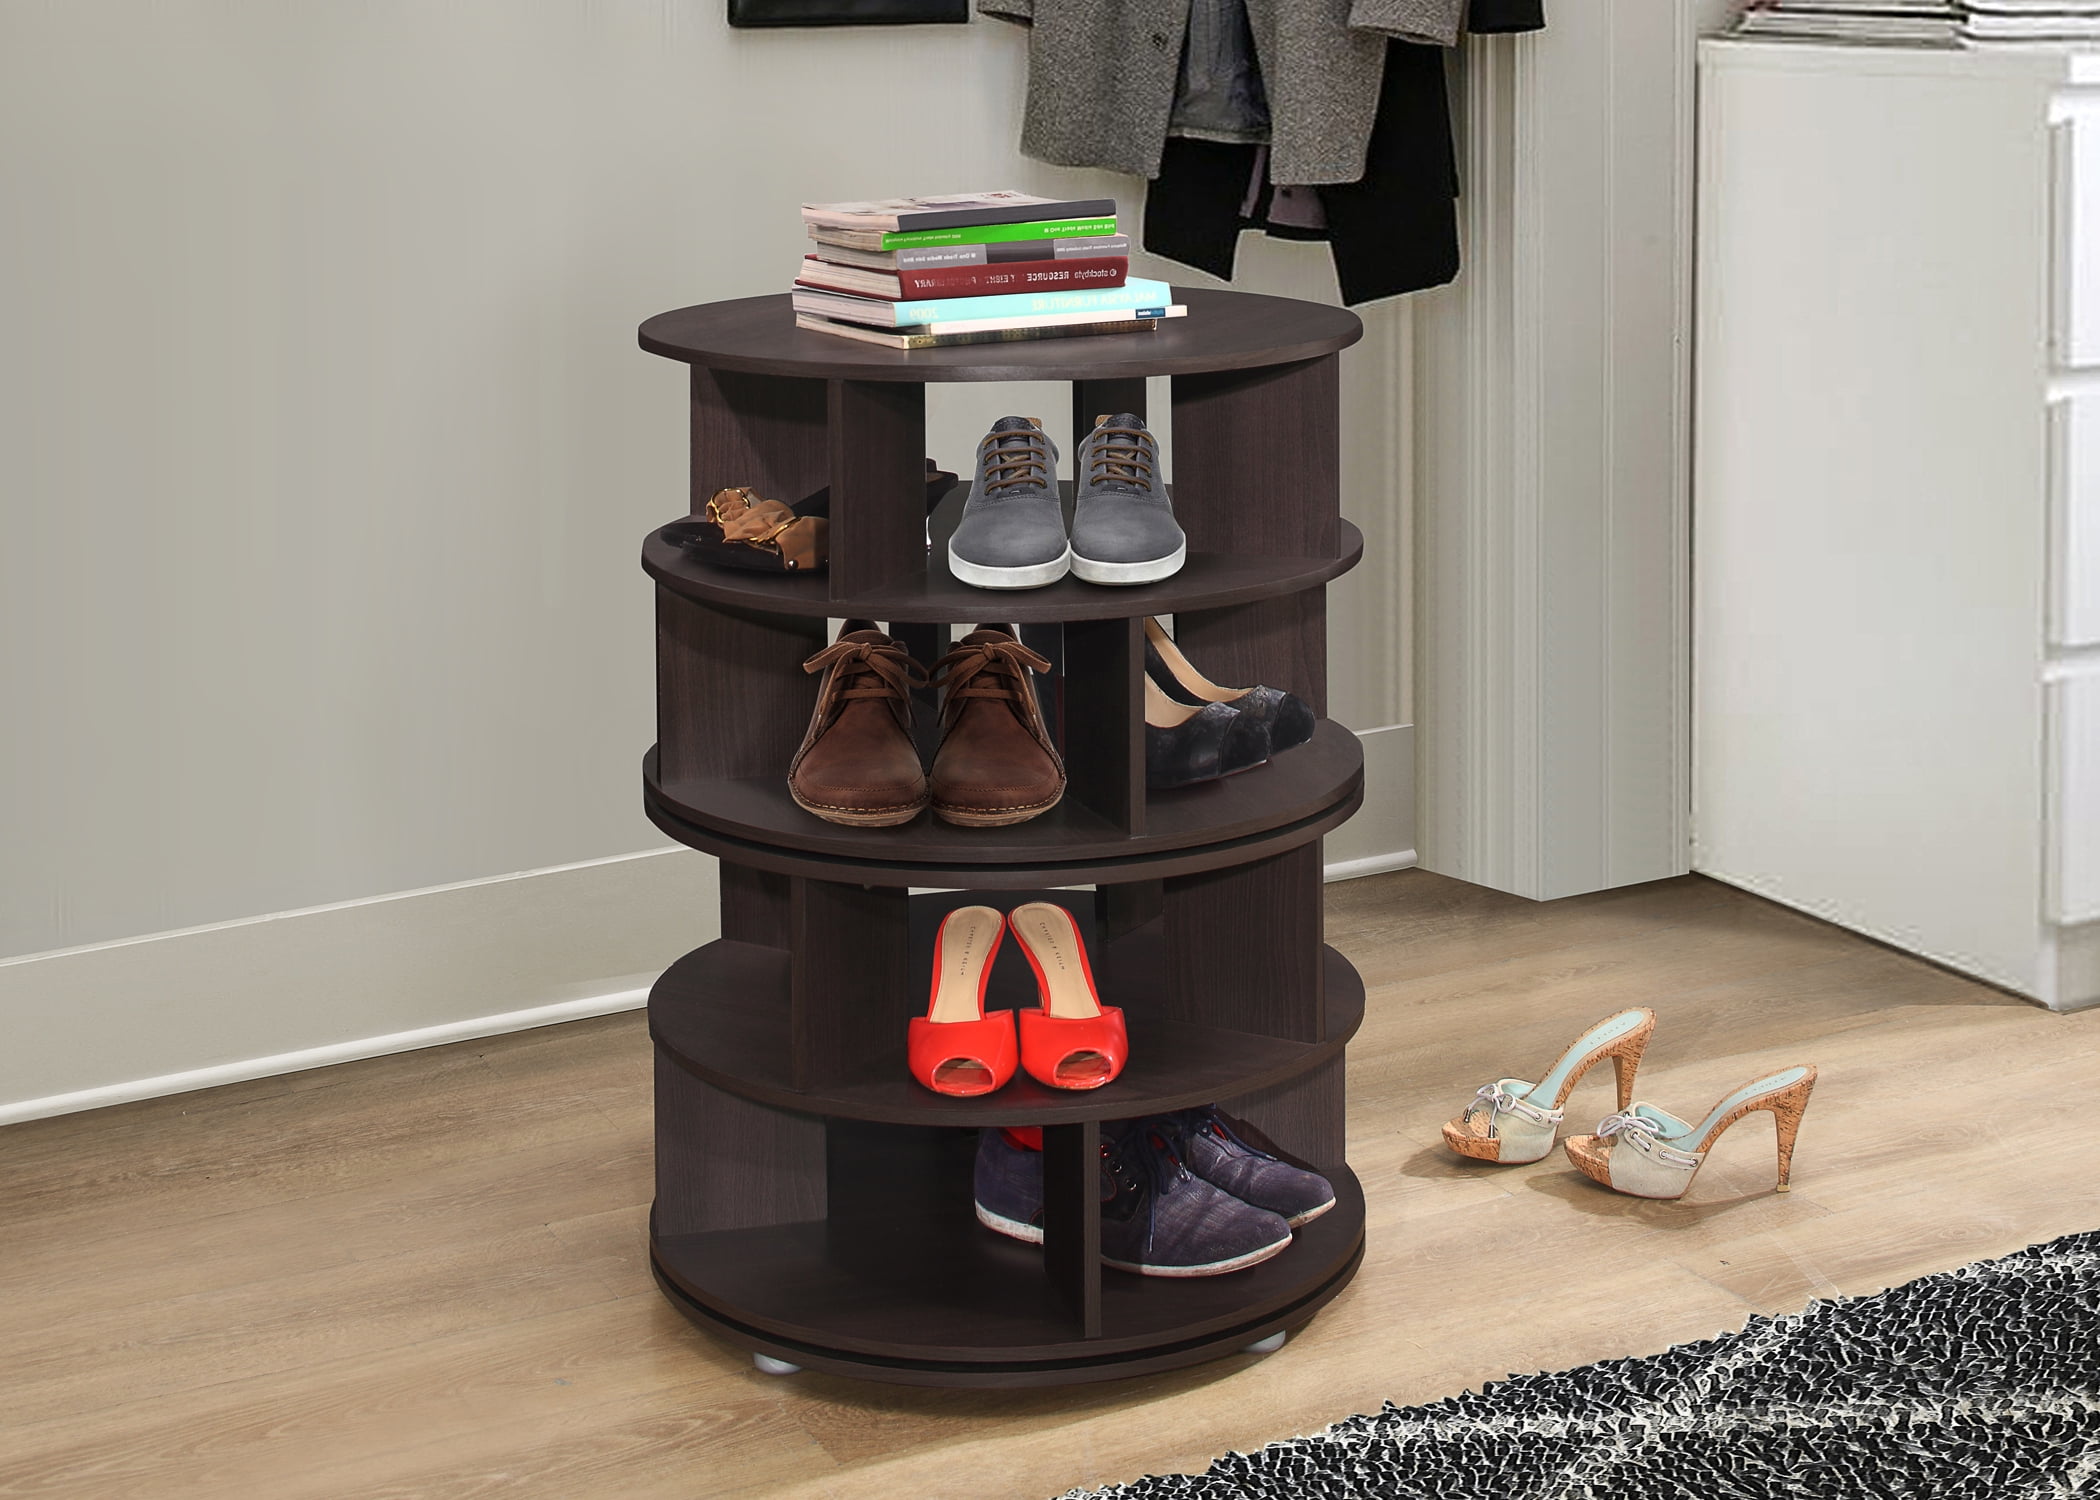 Best Rotating Shoe Rack To Pick The Best Pair With Ease | Storables